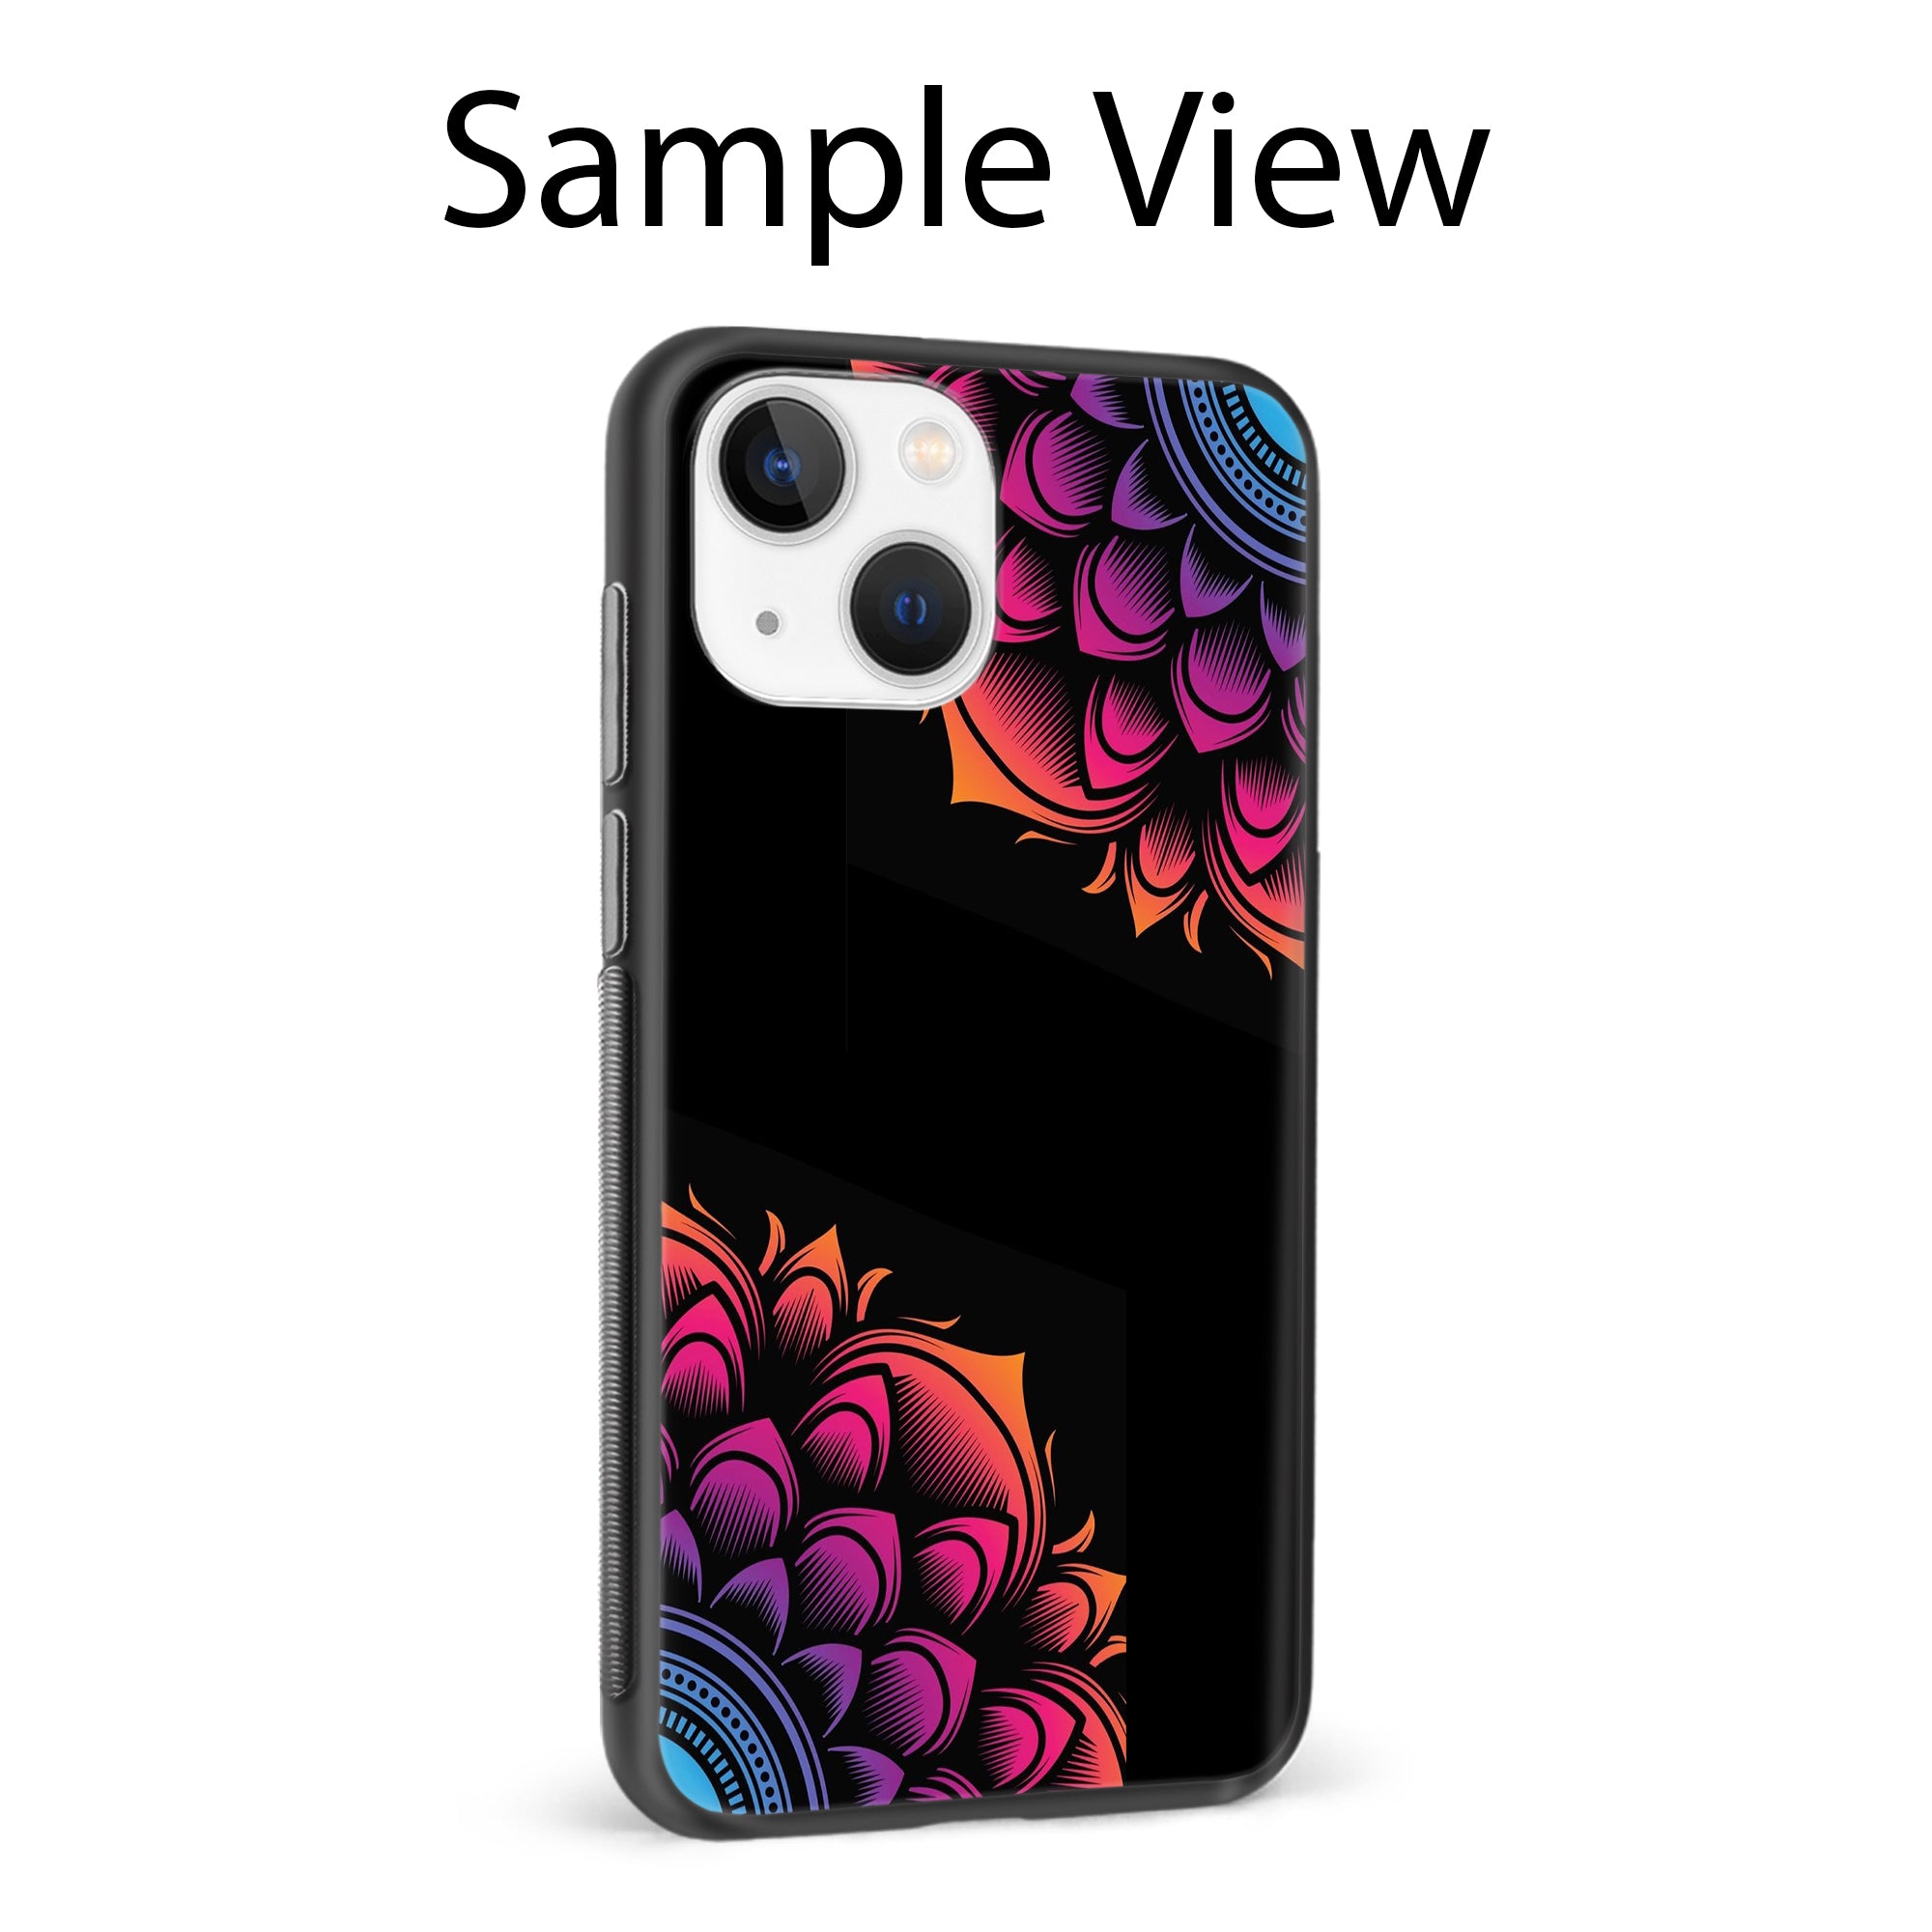 Buy Mandala Glass/Metal Back Mobile Phone Case/Cover For iPhone 11 Pro Online